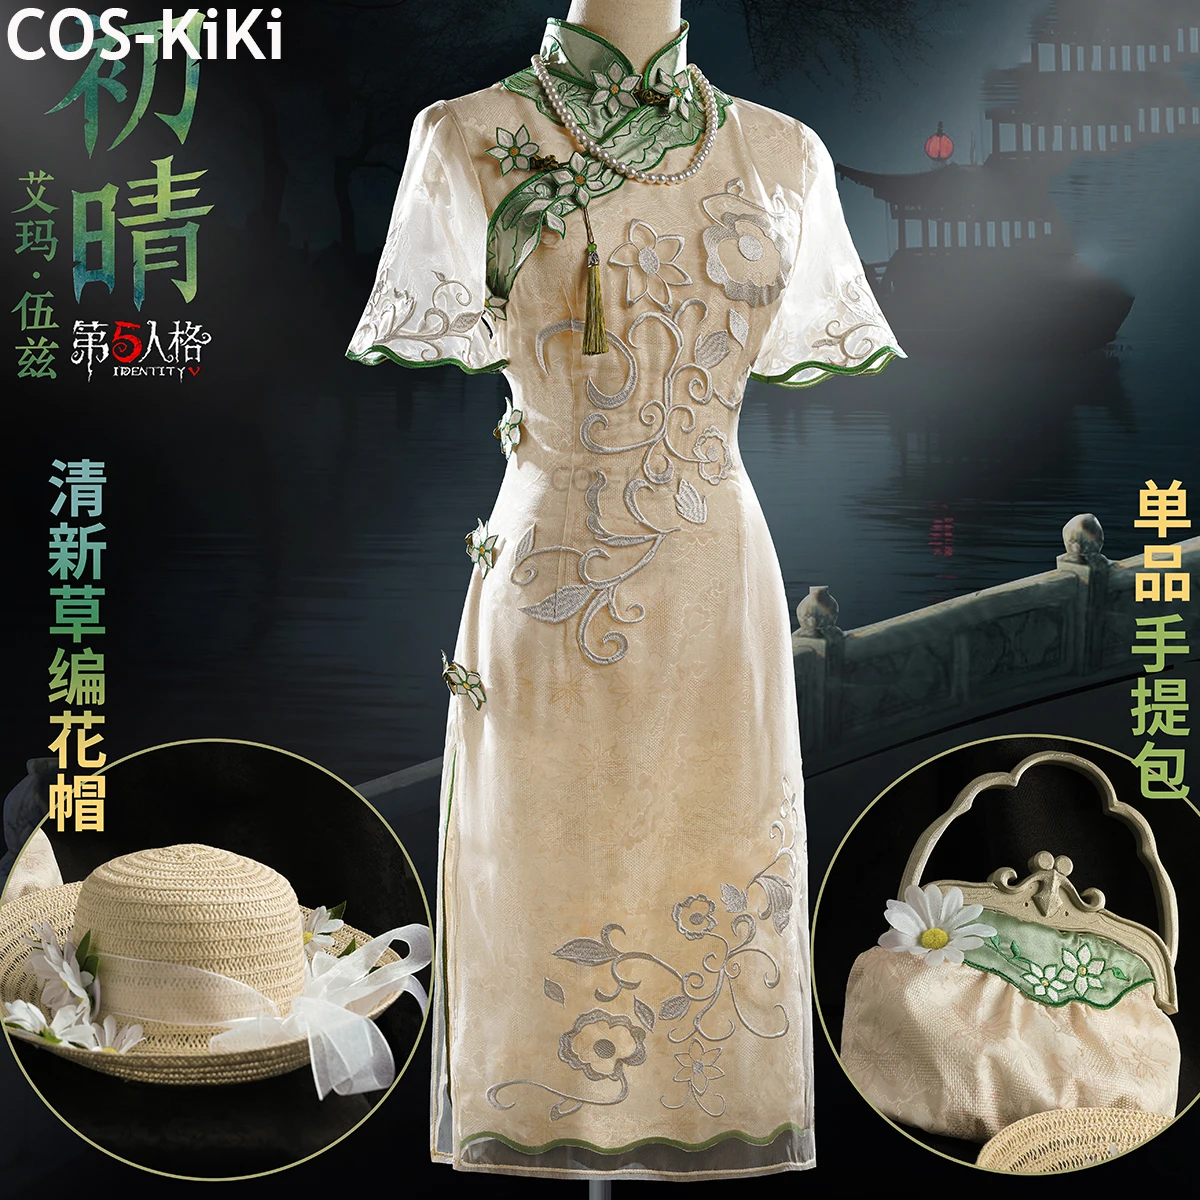 

COS-KiKi Identity V Emma Woods Fashion Game Suit Gorgeous Cheongsam Dress Cosplay Costume Halloween Party Outfit Women S-XXL